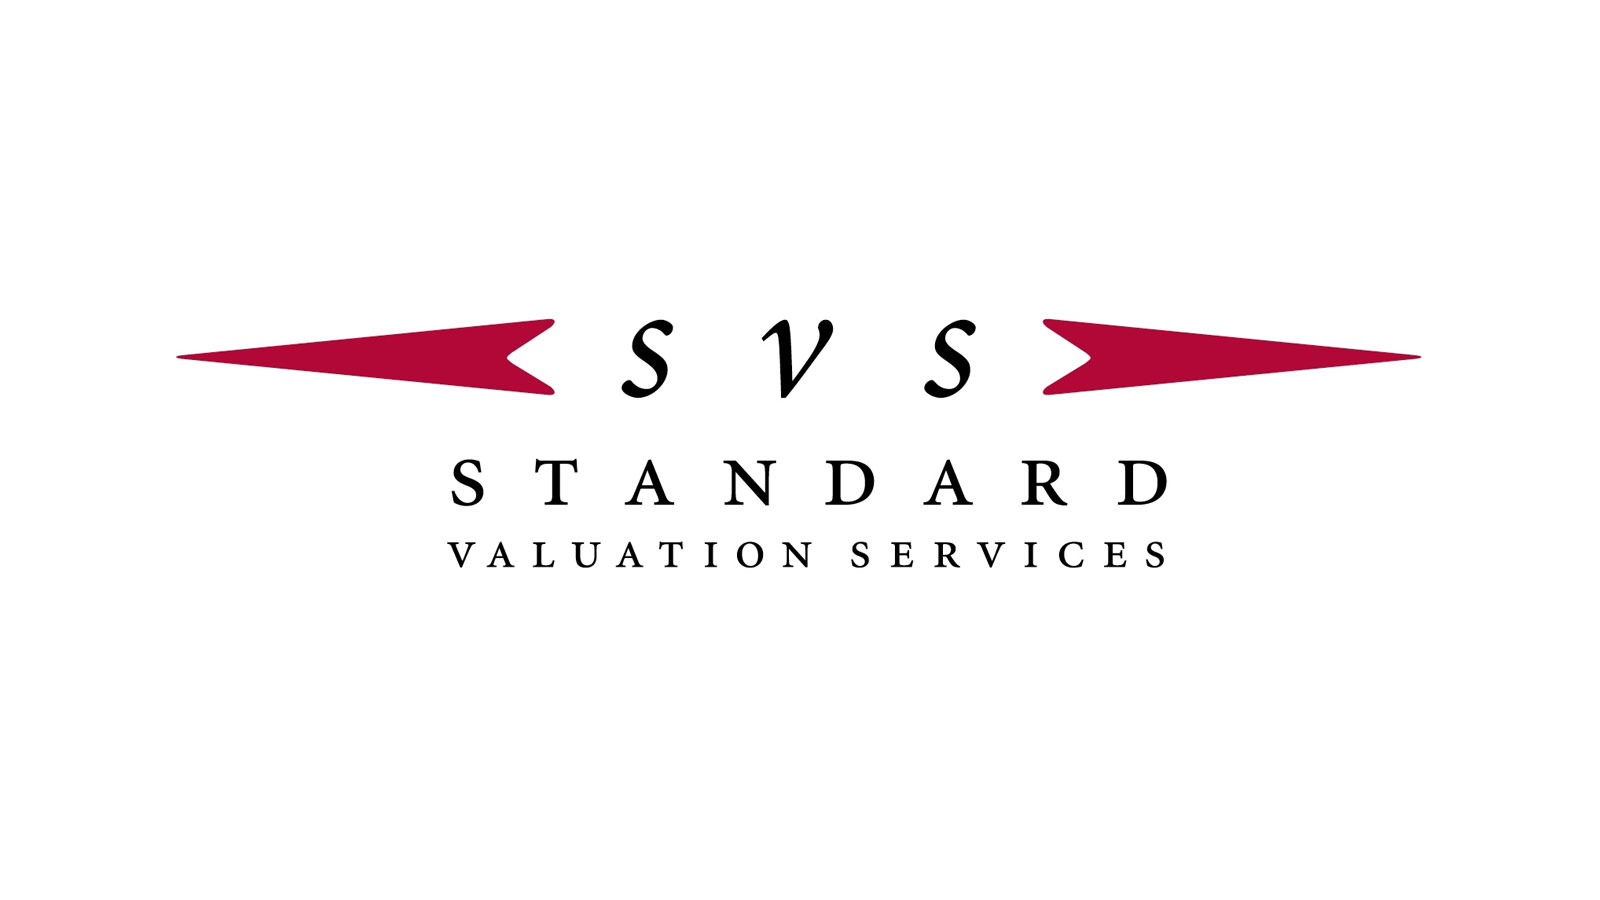 Standard Valuation Services